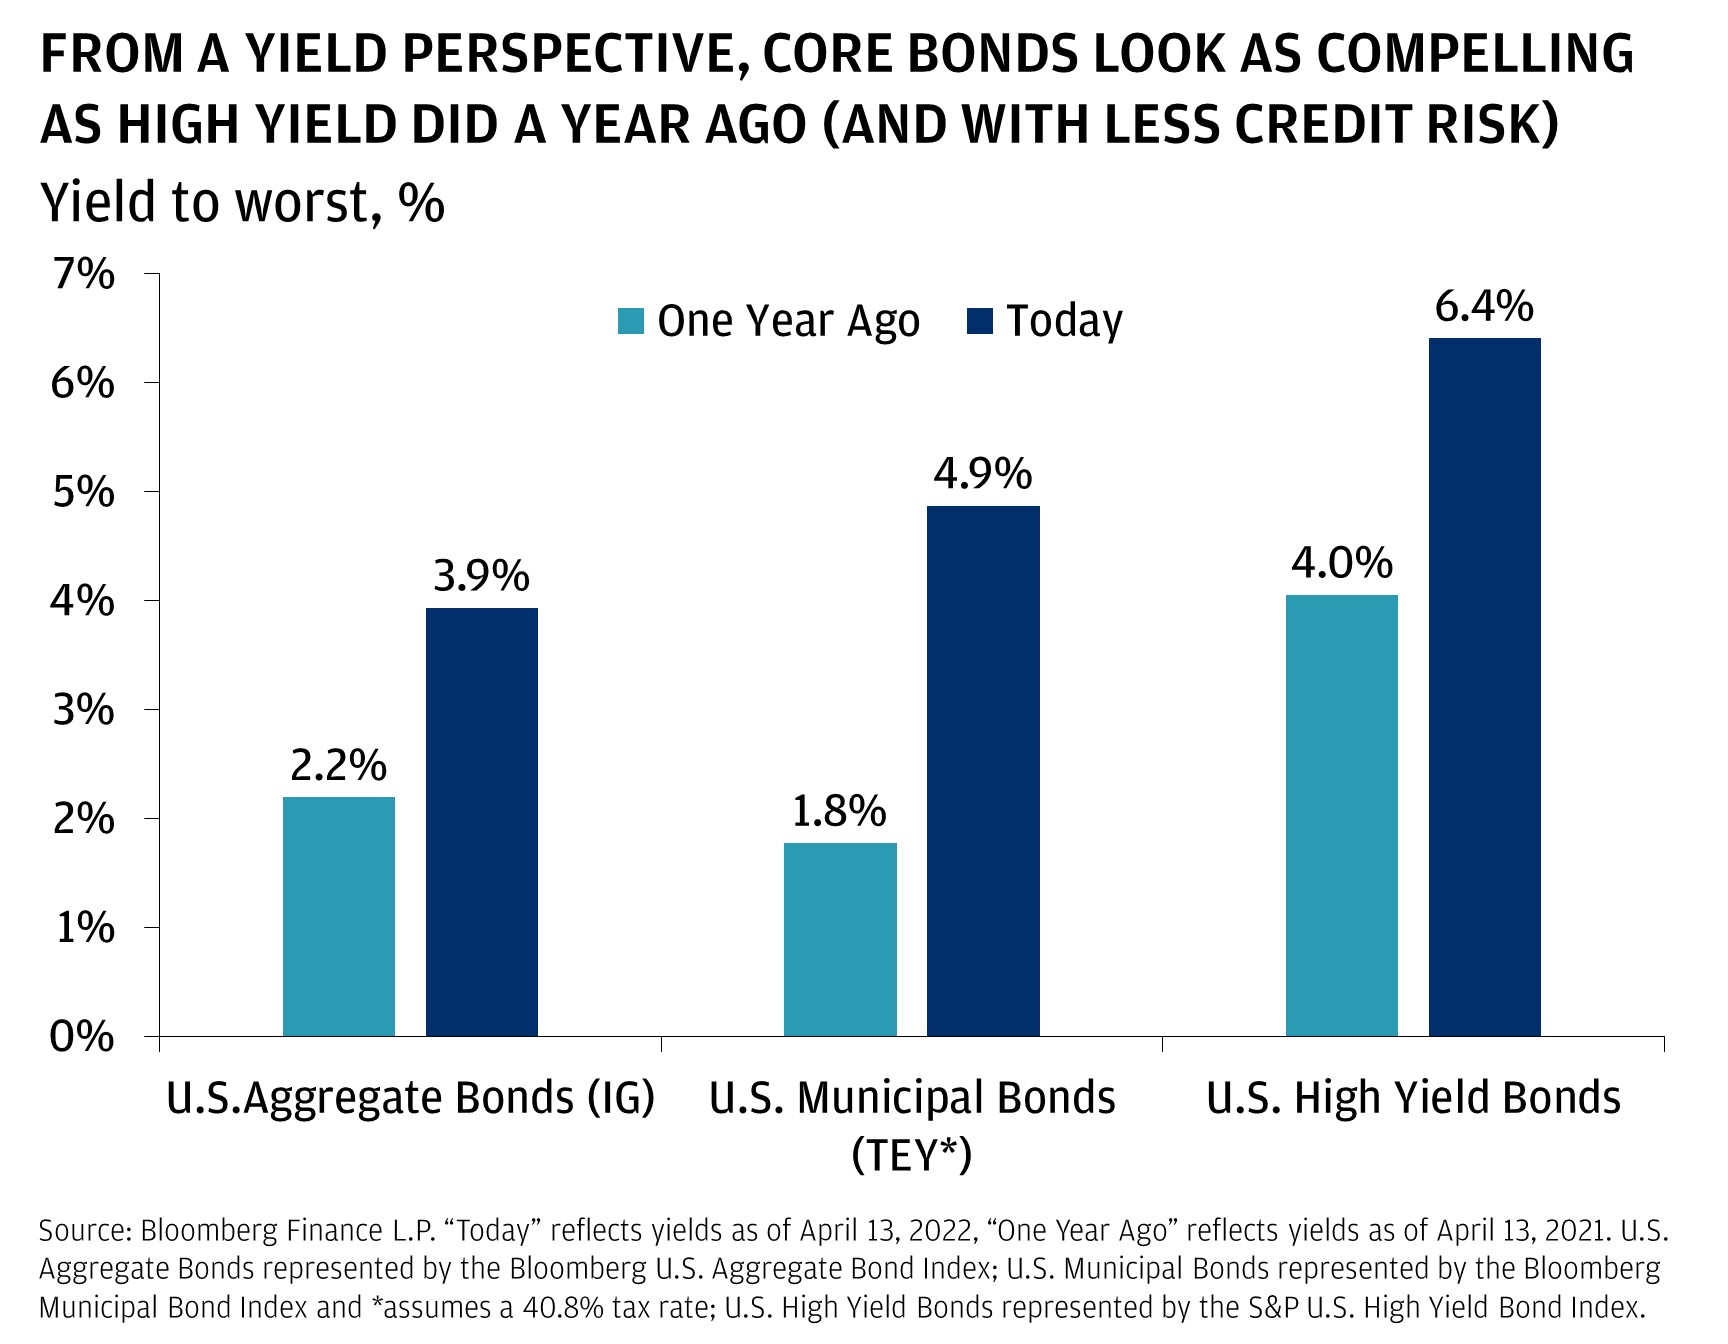 FROM A YIELD PERSPECTIVE, CORE BONDS LOOK AS COMPELLING AS HIGH YIELD DID A YEAR AGO (AND WITH LESS CREDIT RISK).This chart shows a comparison of the the yield to worst of U.S. Aggregate Bonds (IG, represented by the Bloomberg U.S. Aggregate Bond Index), U.S. Municipal Bonds (Tax Equivalent Yield assuming a 40.8% tax rate, represented by the Bloomberg Municipal Bond Index), and U.S. High Yield Bonds (represented by the S&P U.S. High Yield Bond Index) as of April 13, 2021 and April 13, 2022.